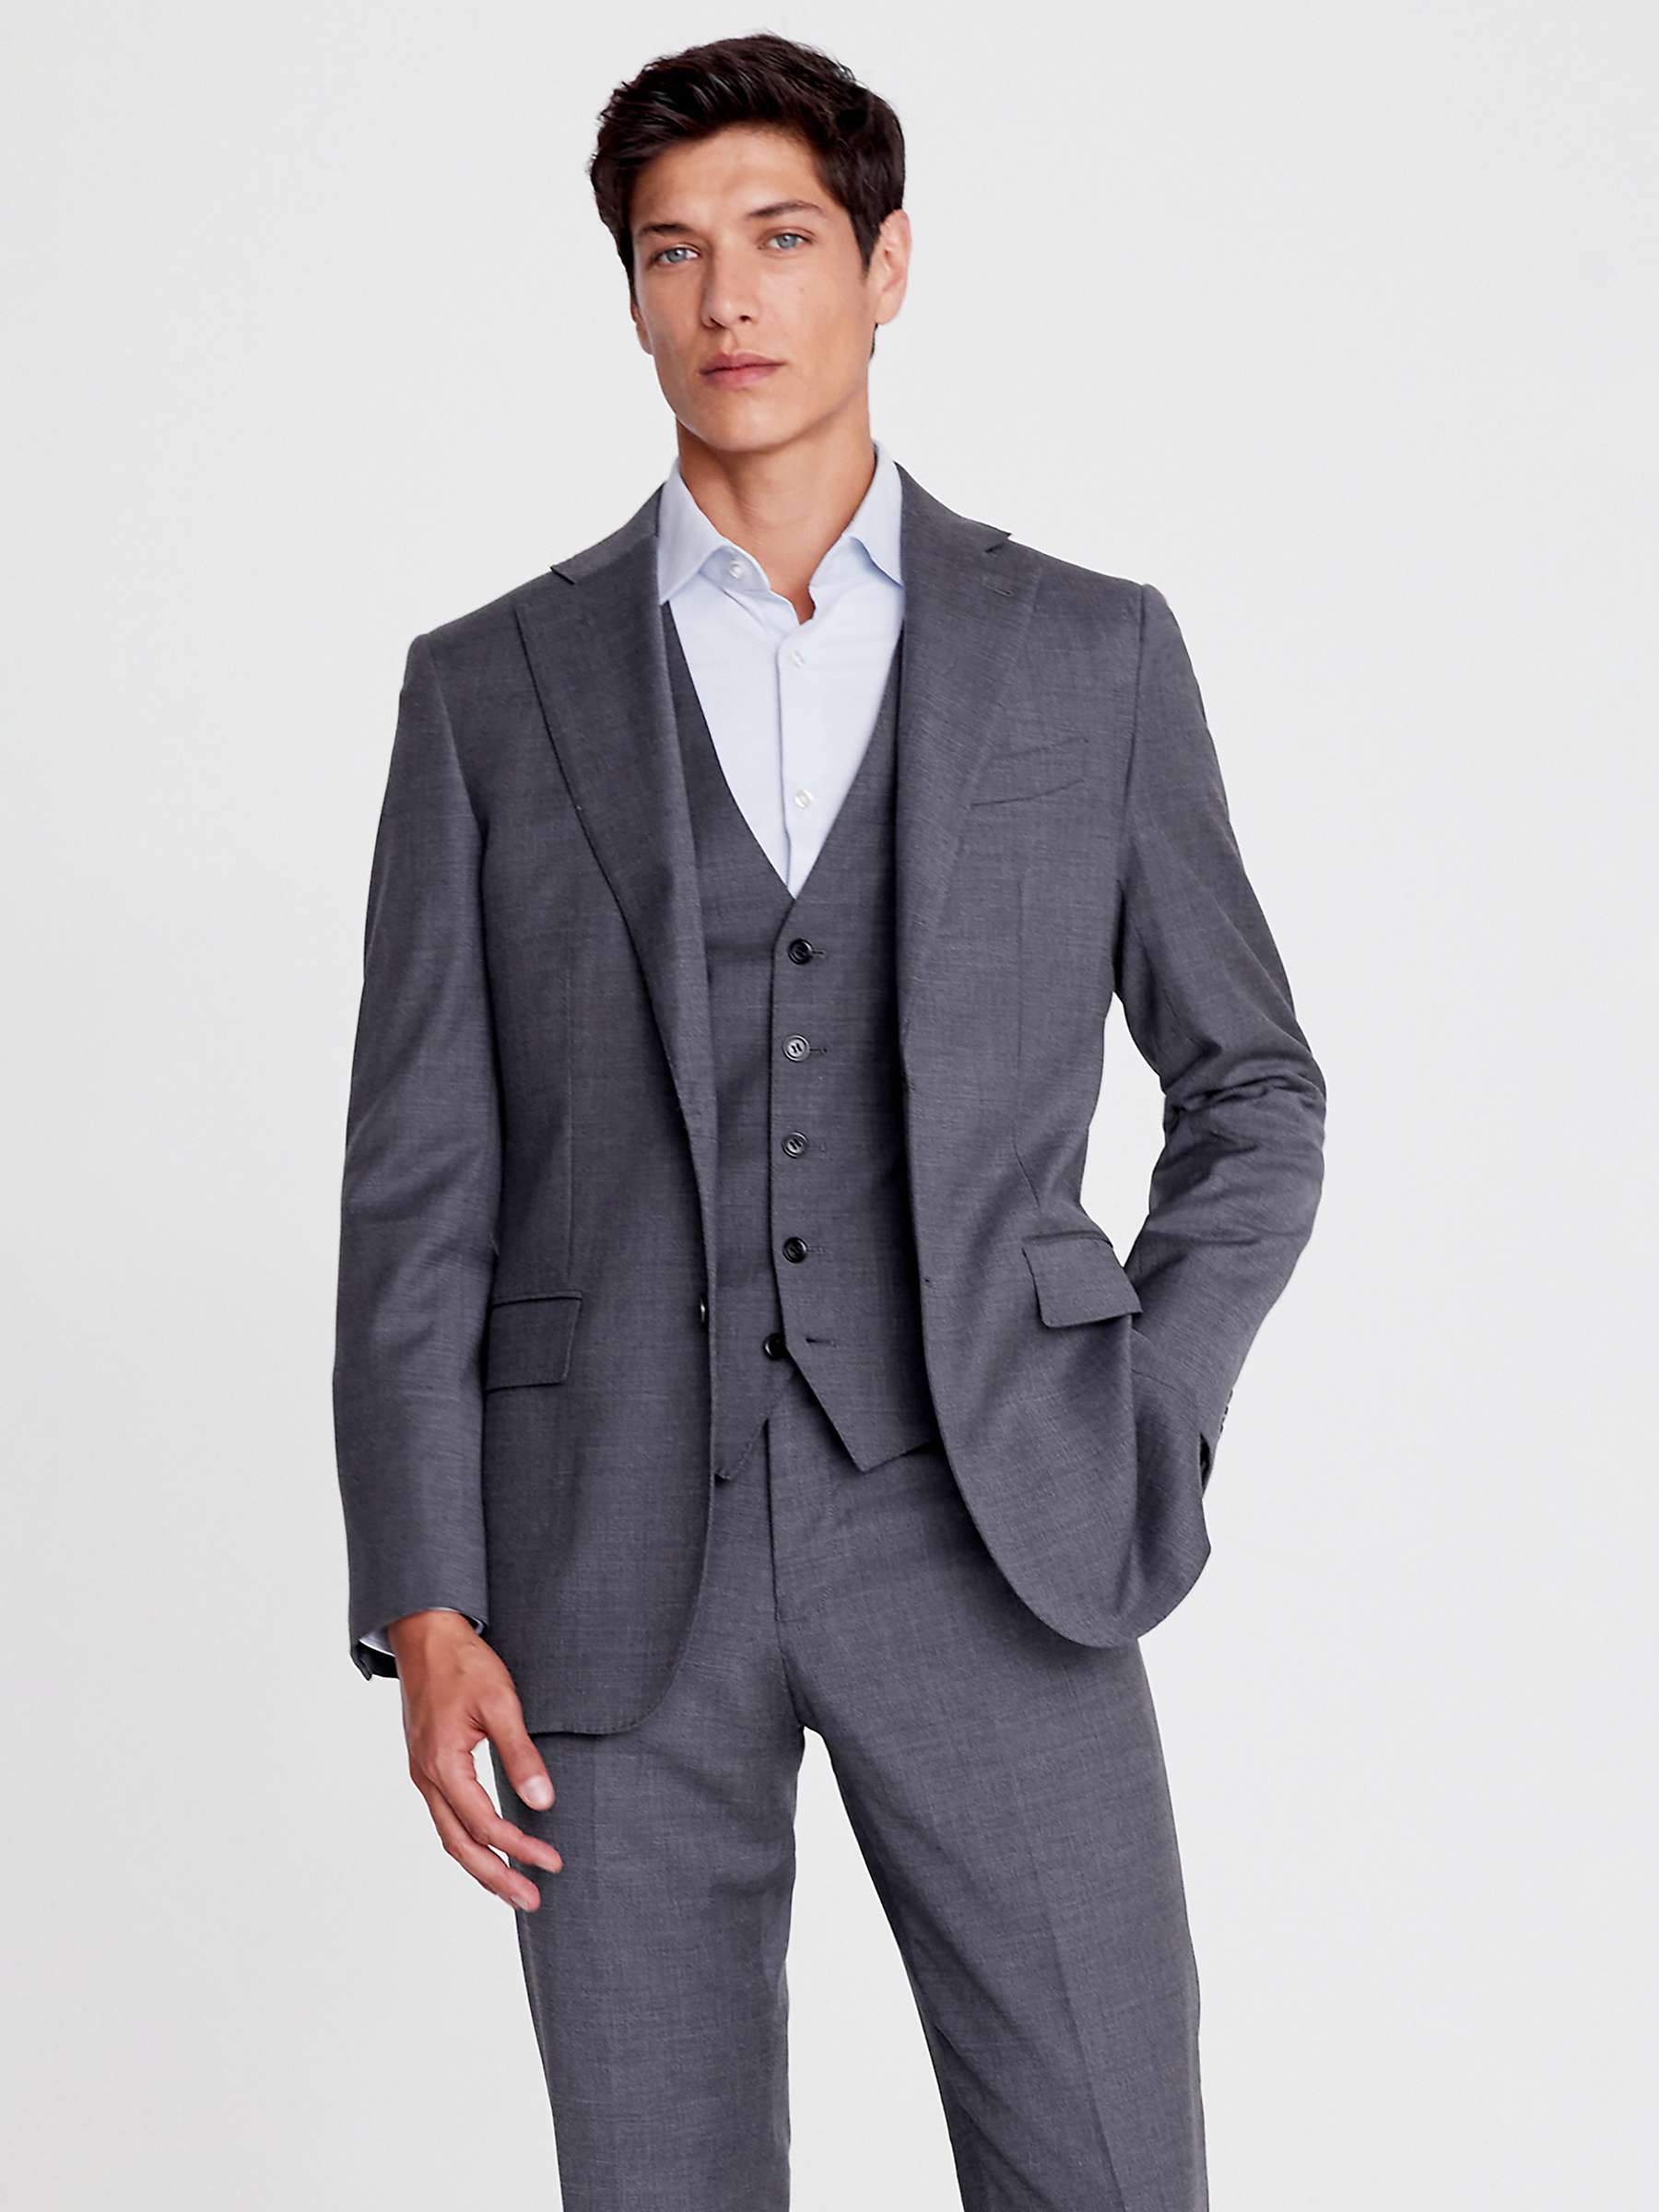 Buy Moss Tailored Fit Twill Suit Jacket Online at johnlewis.com